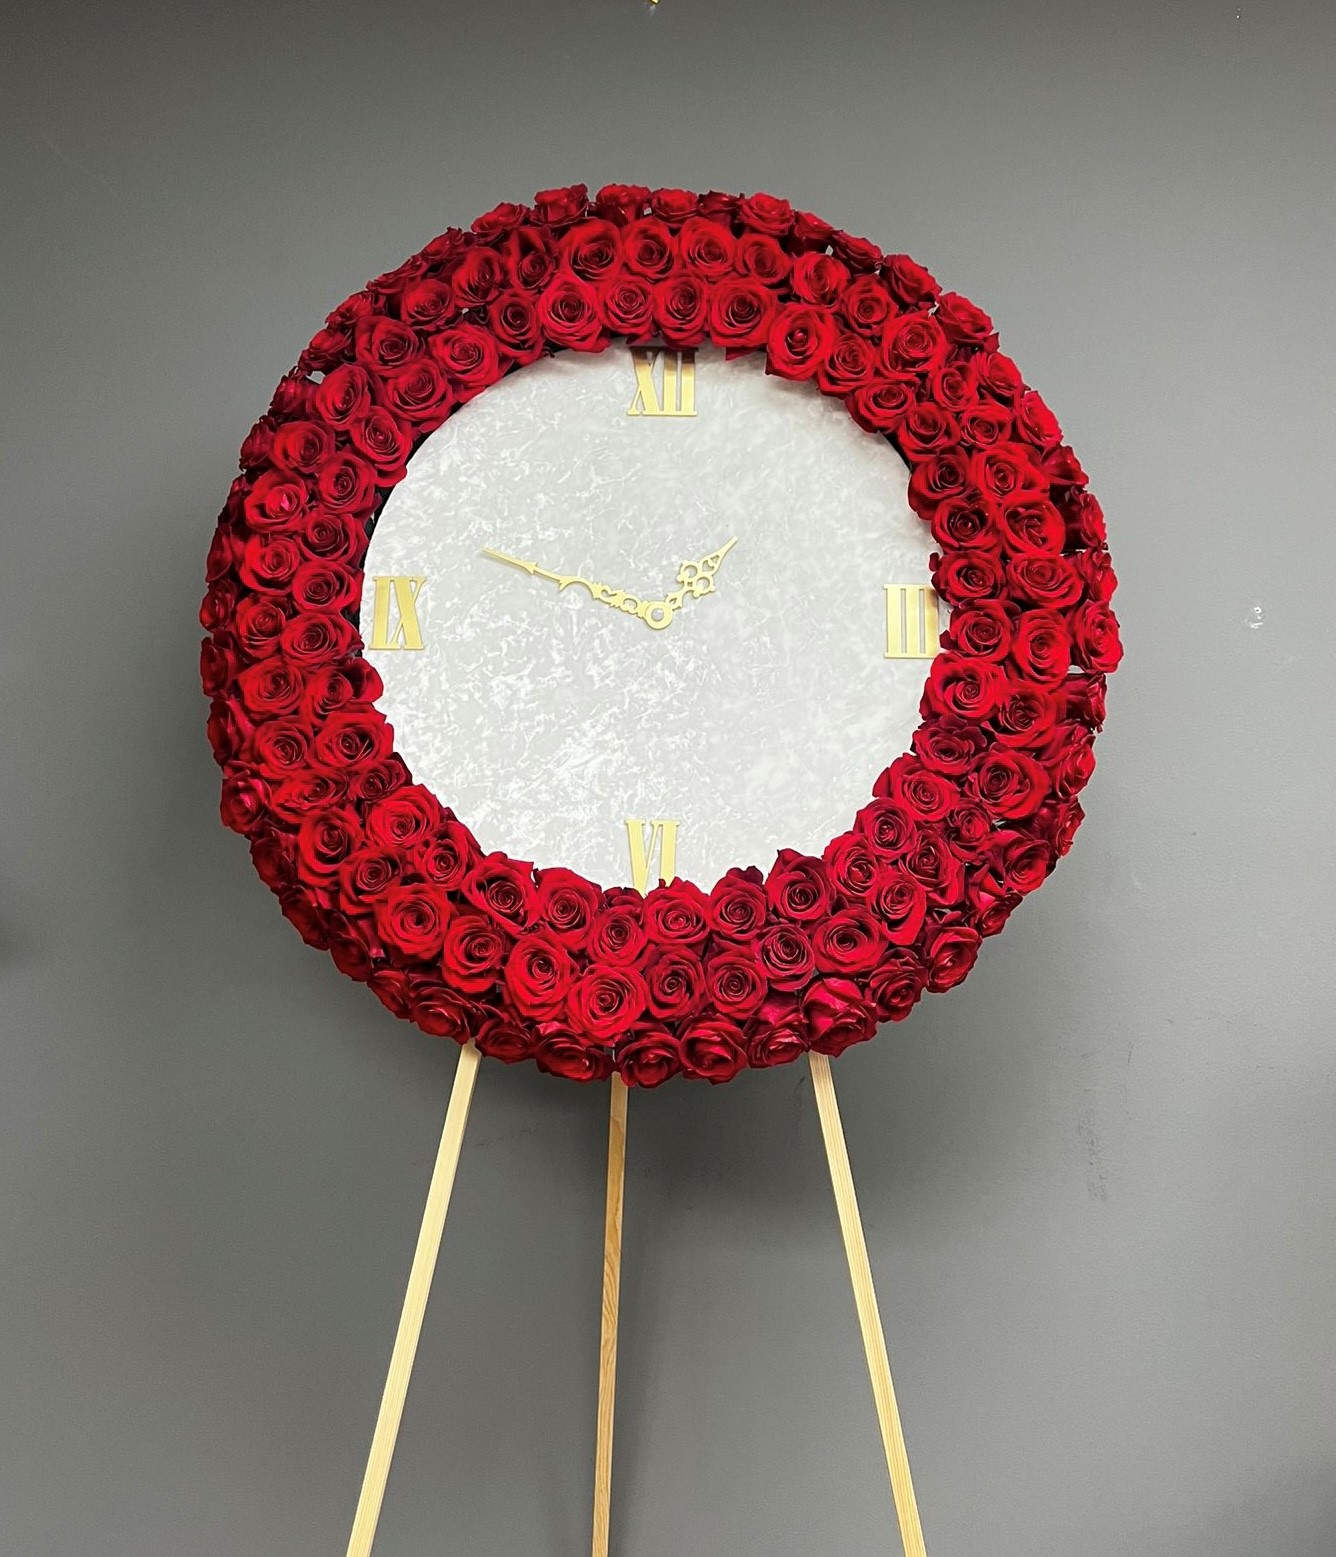 Memorial frame with a stopped clock 2 - The memorial round frame is a poignant and symbolic tribute, designed to honor and remember a loved one who has passed away. It features a stopped clock as the centerpiece, surrounded by a bed of red roses and displayed on an easel. Additionally, a white or black ribbon with professionally printed letters is incorporated into the design. The round frame serves as a symbolic representation of the eternal nature of the departed soul. The stopped clock signifies that time has ceased for the individual, emphasizing the finality of their passing. It serves as a reminder to cherish the moments spent with the person and reflect on the preciousness of time. The red roses encircling the clock hold deep significance in the language of flowers. They symbolize love, respect, and courage. The vibrant red color signifies the intensity of emotions and the enduring love that continues even after death. The presence of the roses creates a visually striking contrast against the clock, adding a touch of warmth and beauty to the memorial arrangement. The addition of a white or black ribbon with professionally printed letters adds a personalized touch to the memorial arrangement. The ribbon can bear a name, a meaningful quote, or any other short text. For longer texts you can choose to attach printed sympathy card.  The choice of white or black ribbon depends on the desired aesthetic or symbolism. White often represents purity, peace, and spirituality, while black can convey solemnity, reverence, and mourning.